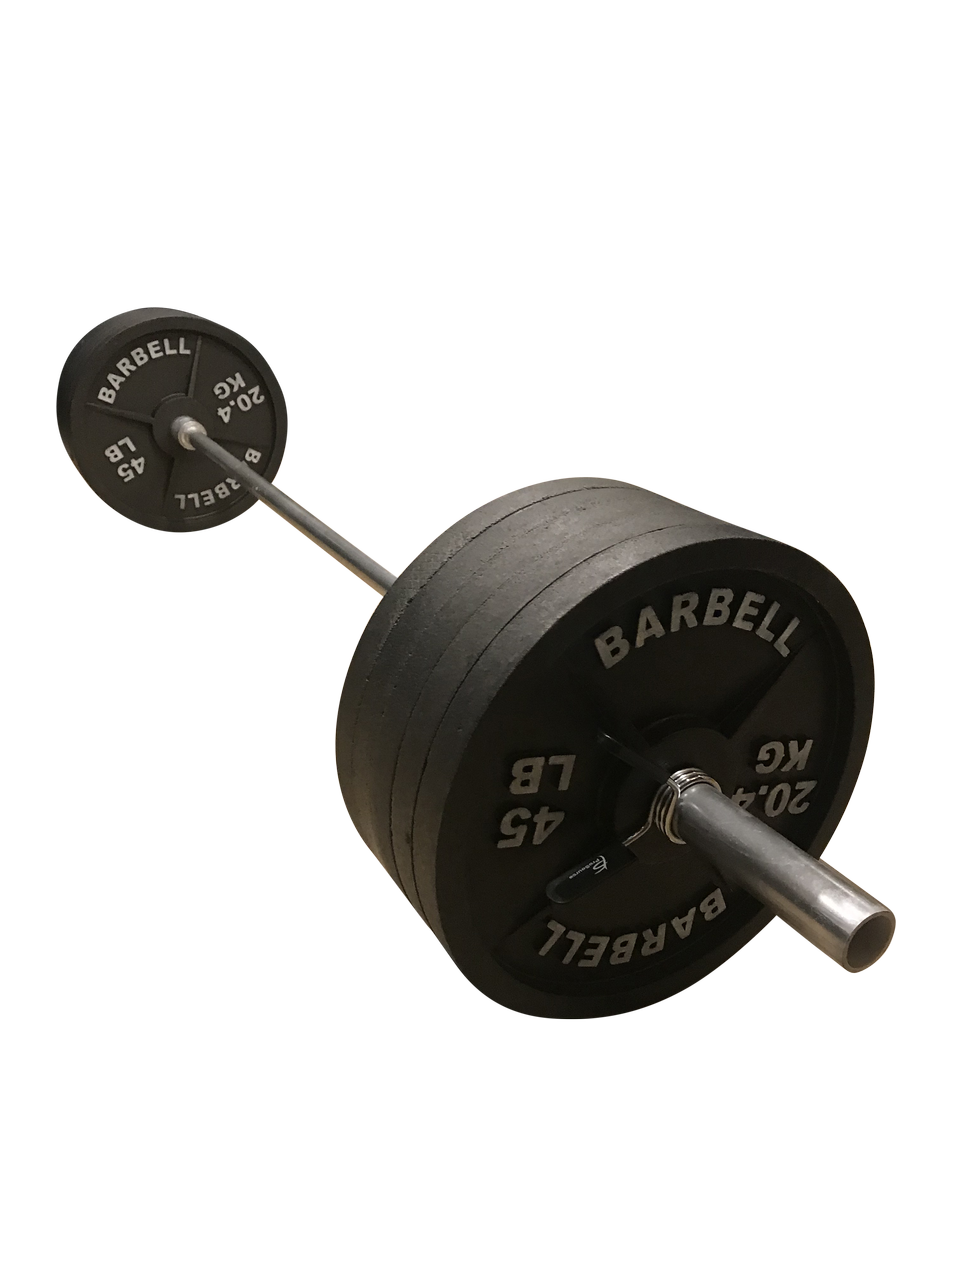 barbell weight